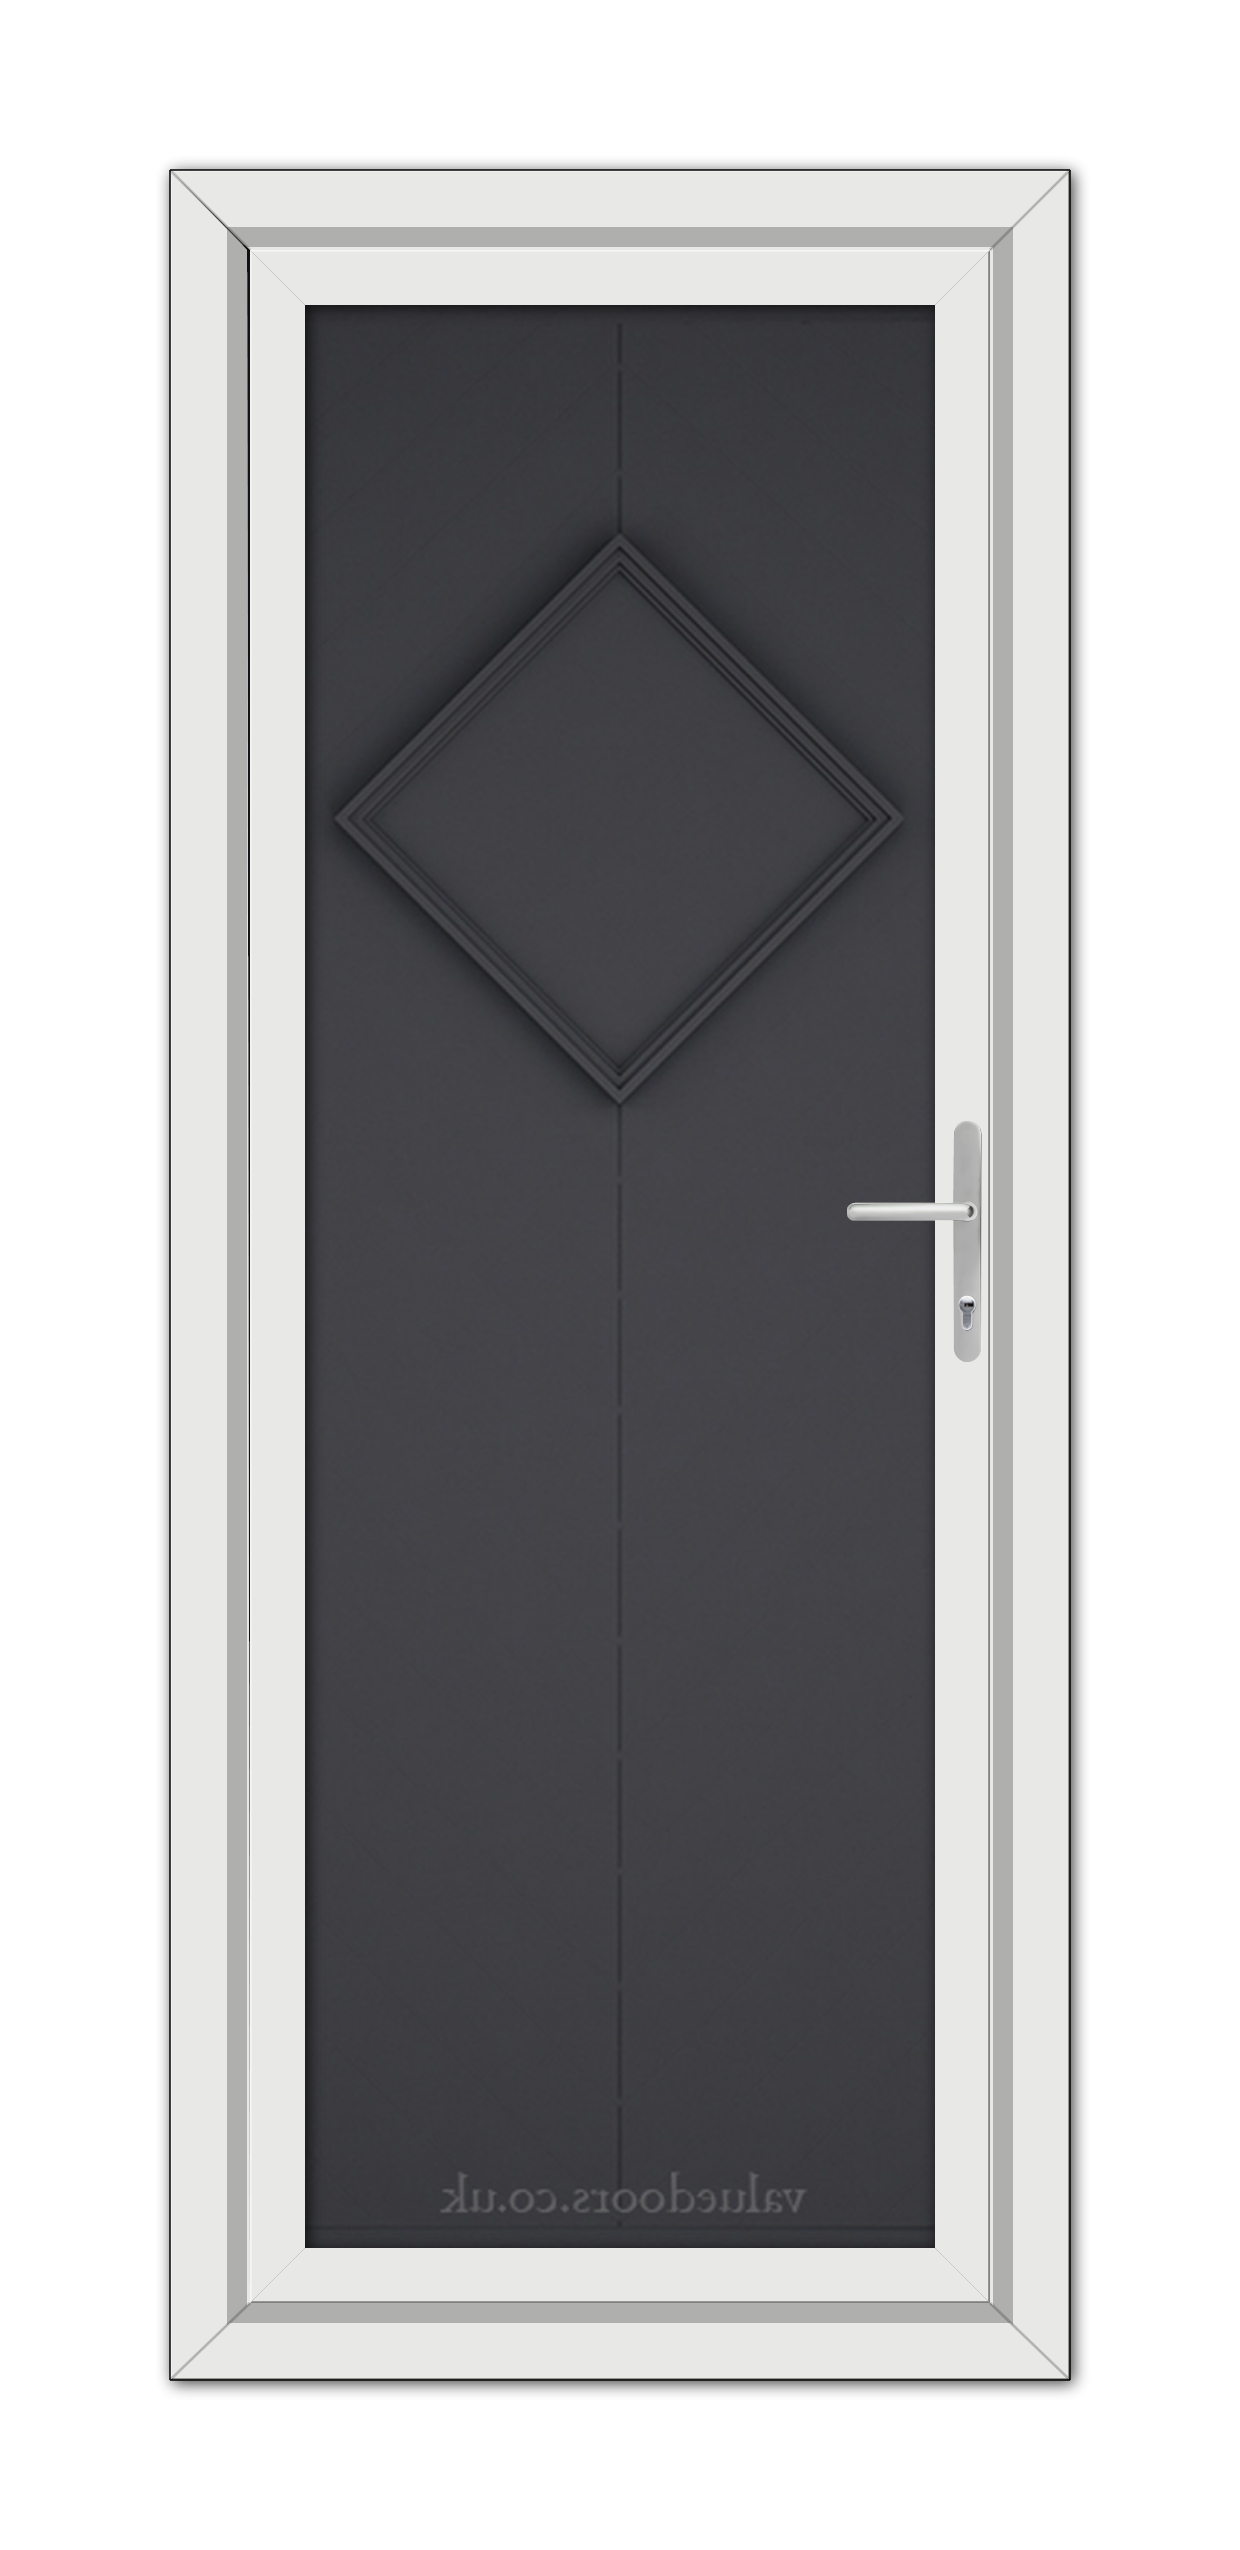 A modern Grey Hamburg Solid uPVC door with a diamond-shaped panel, silver handle, and white frame.